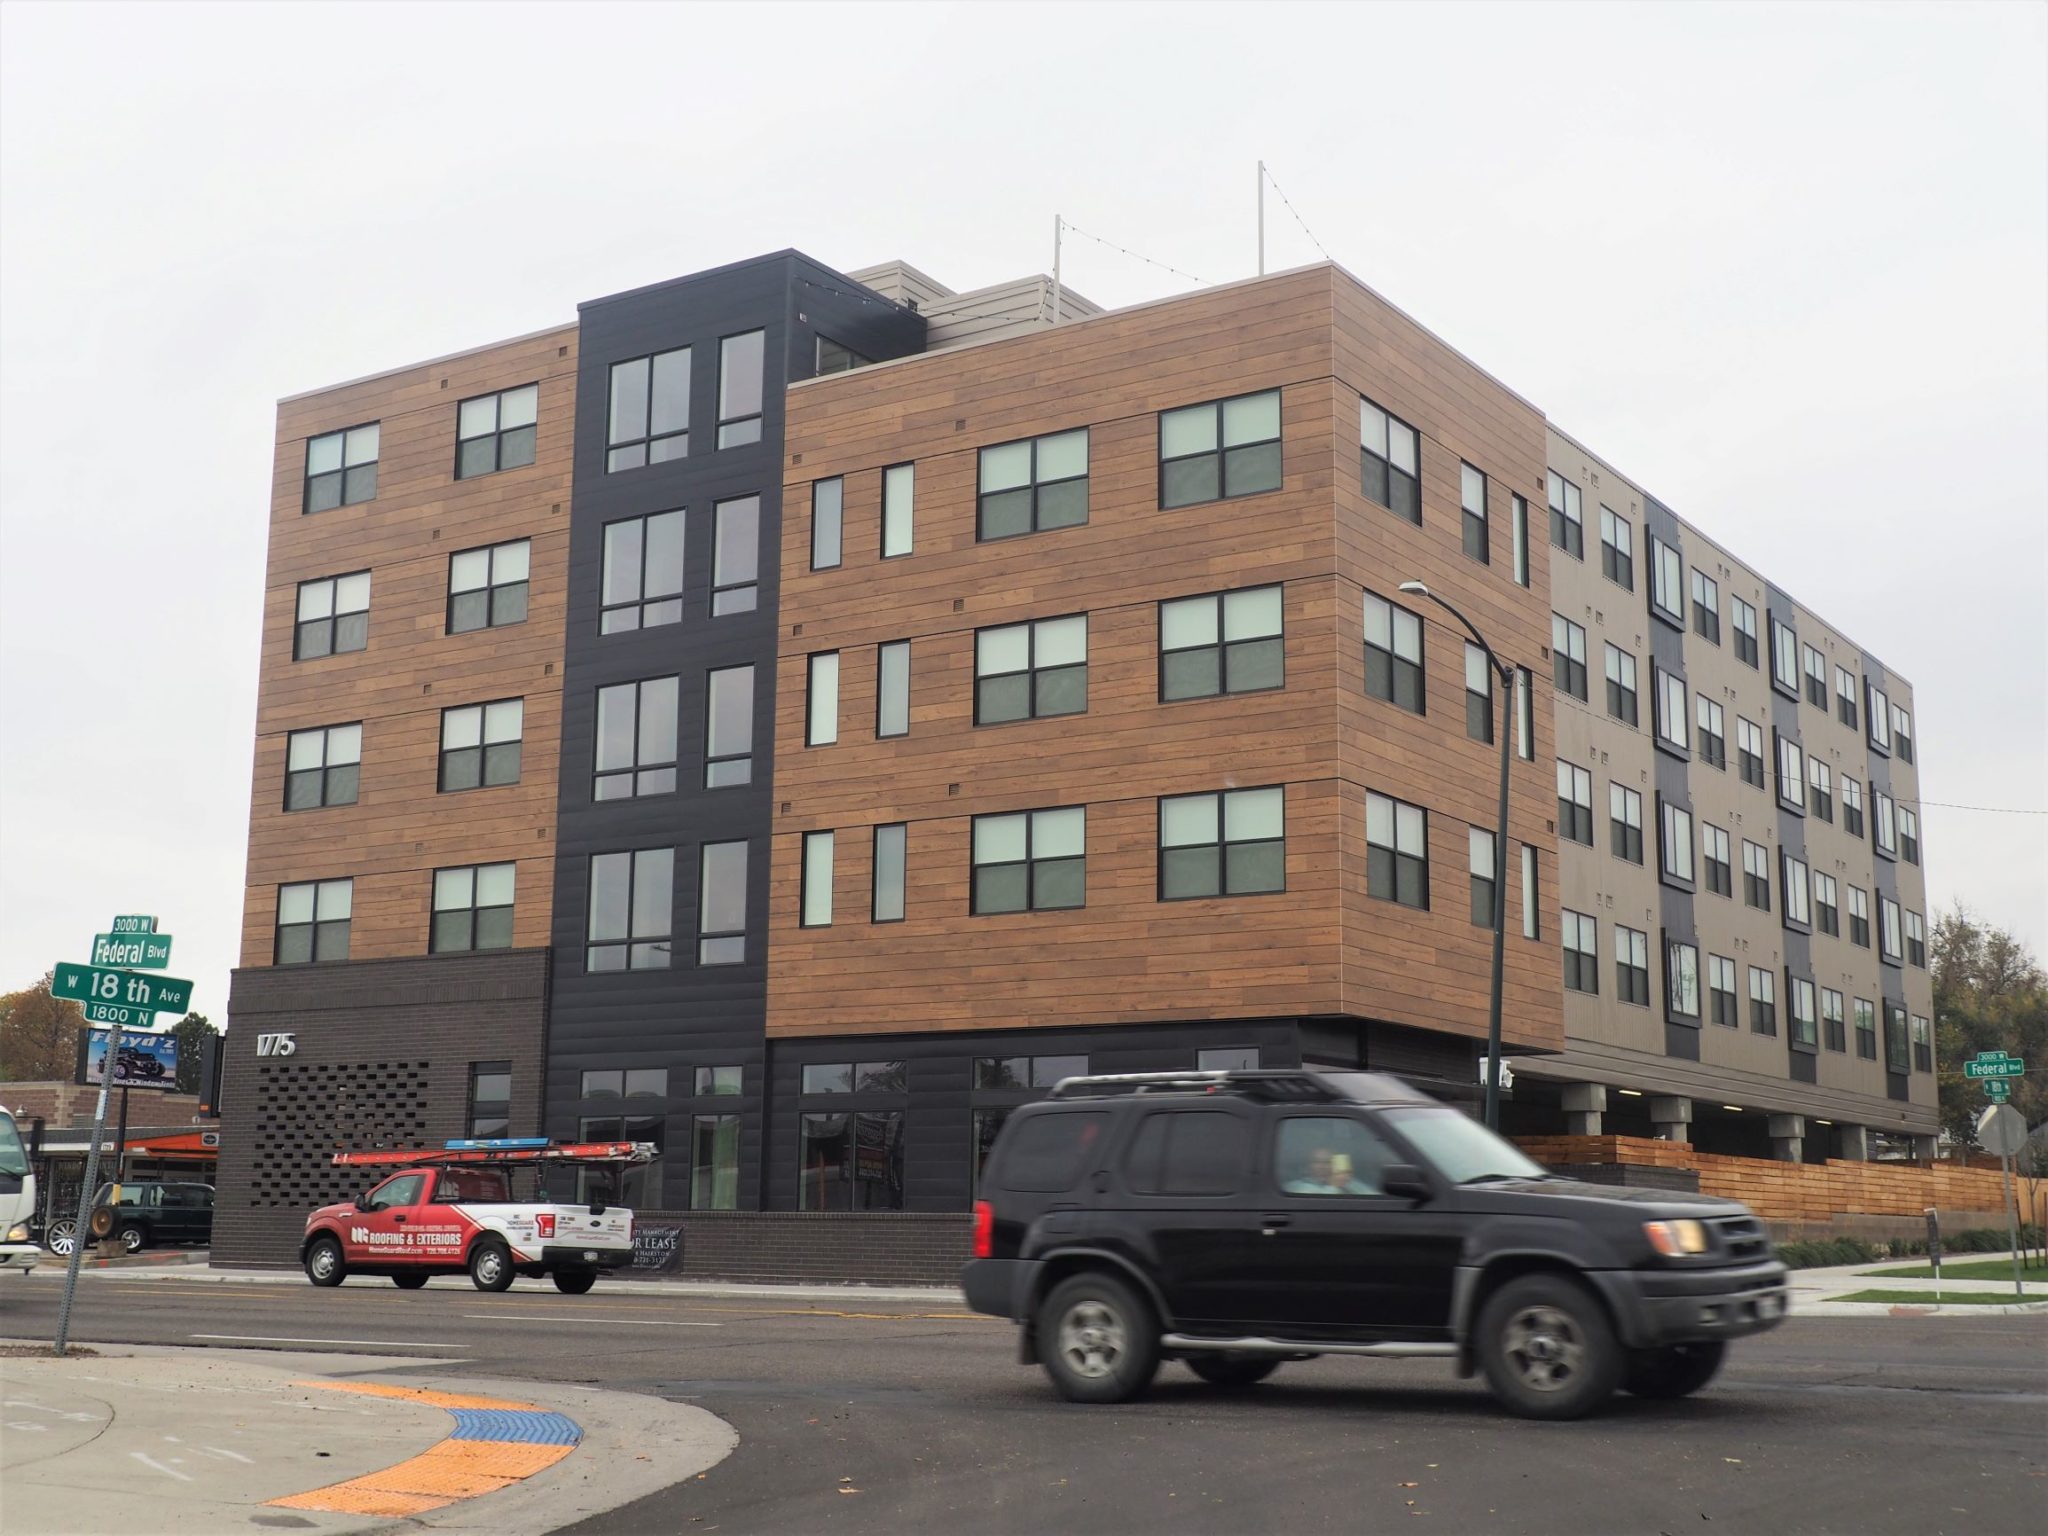 New modular apartment building along Federal sells for 15.6M BusinessDen